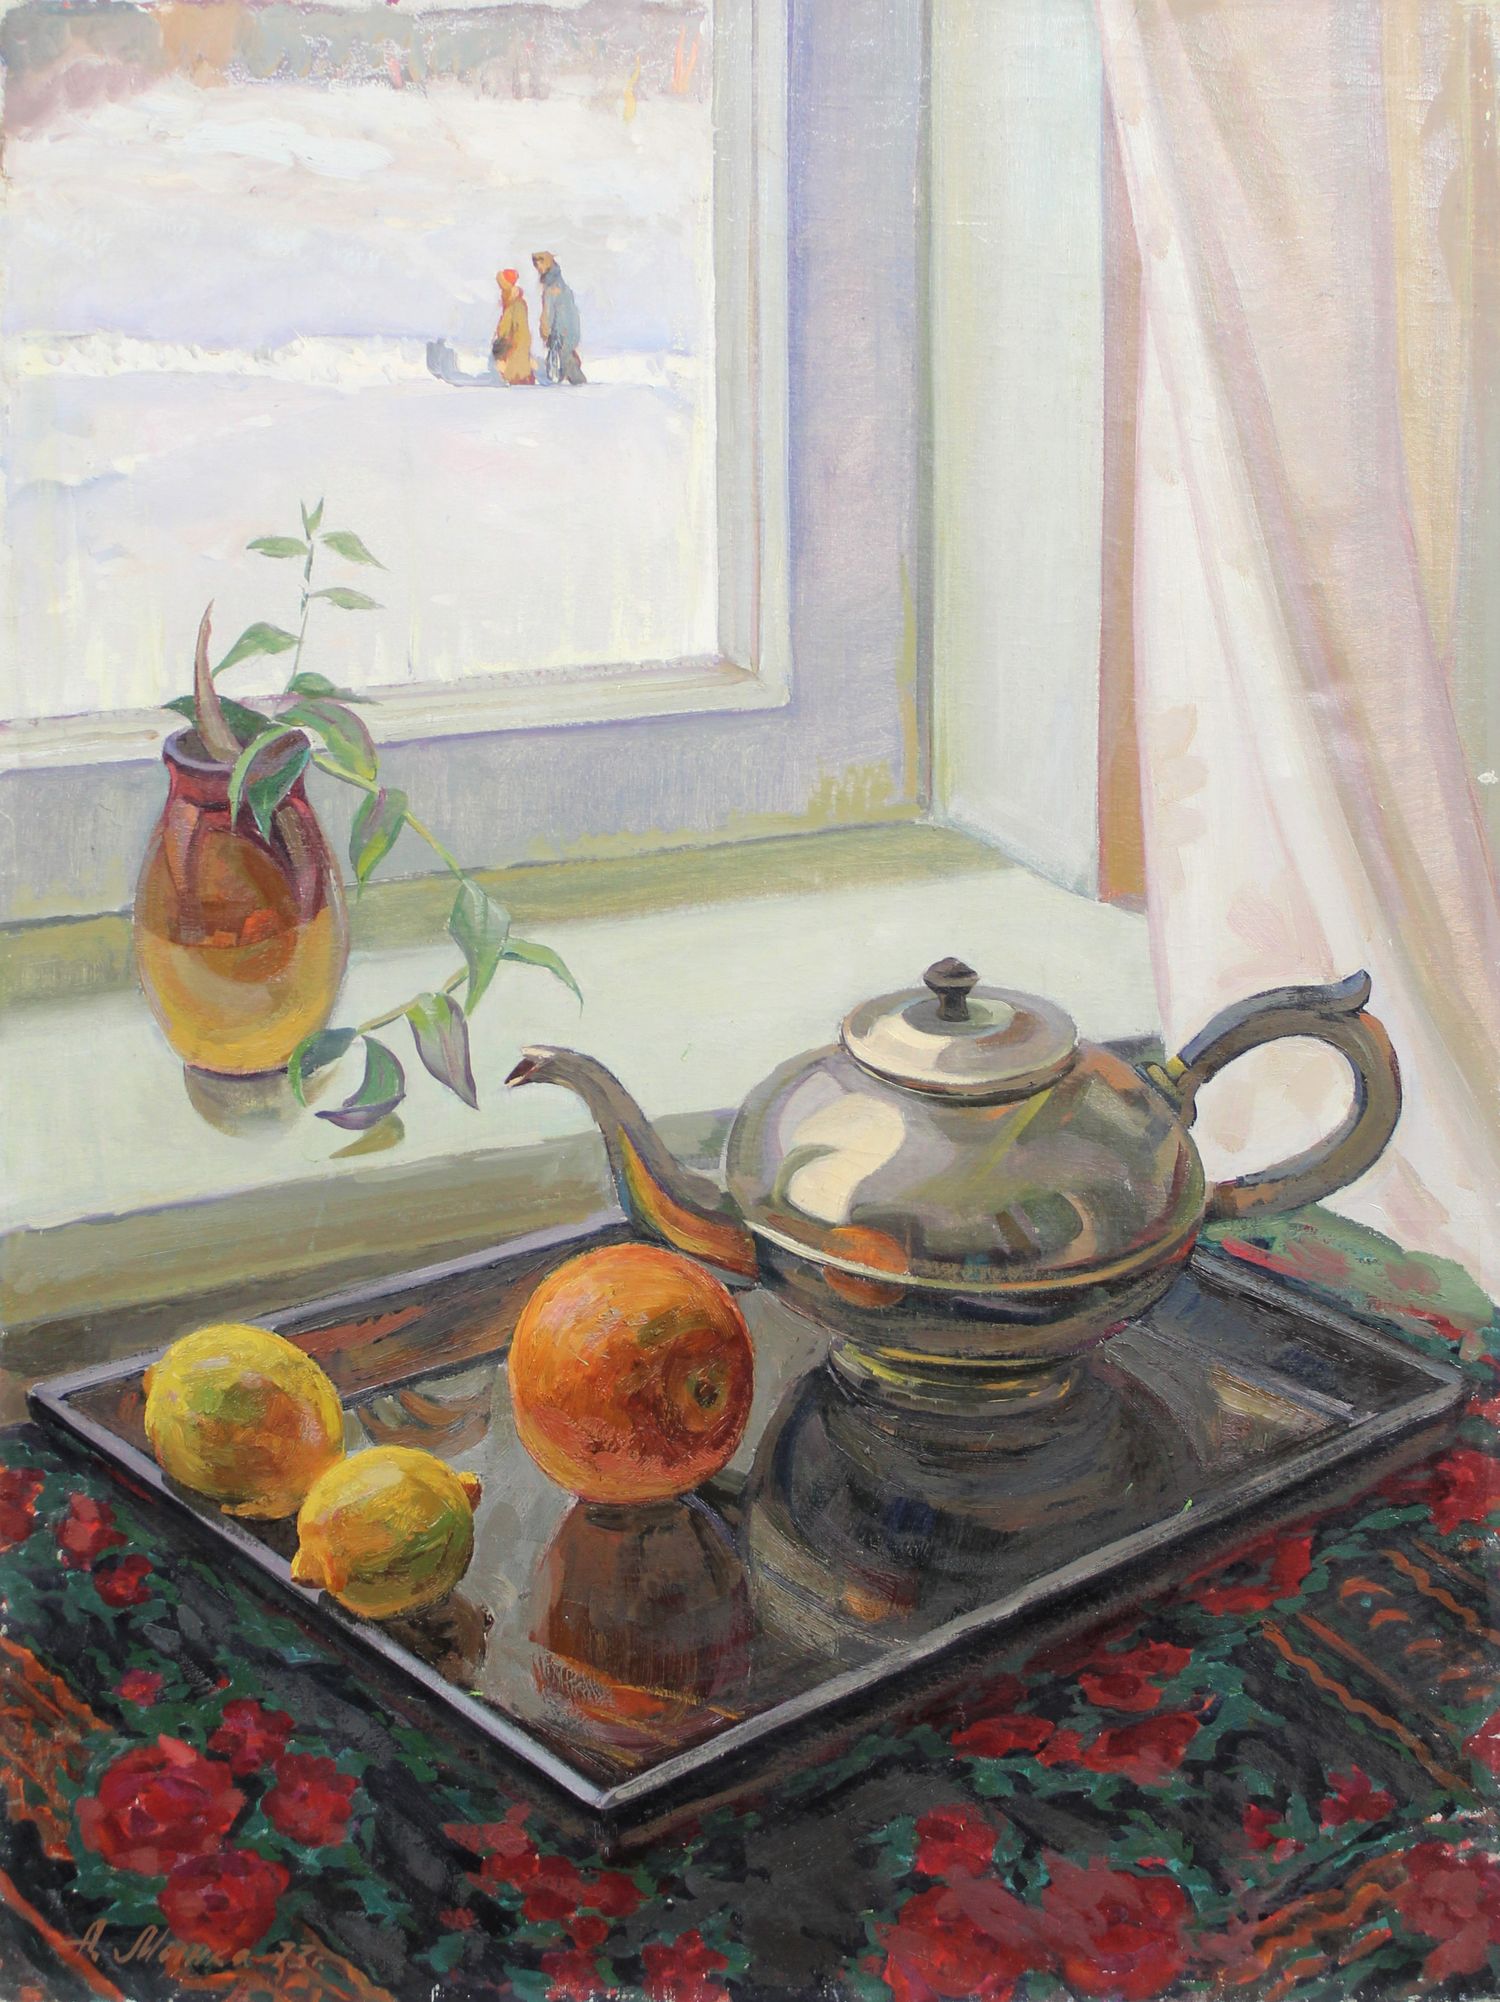 "Still life with the window"